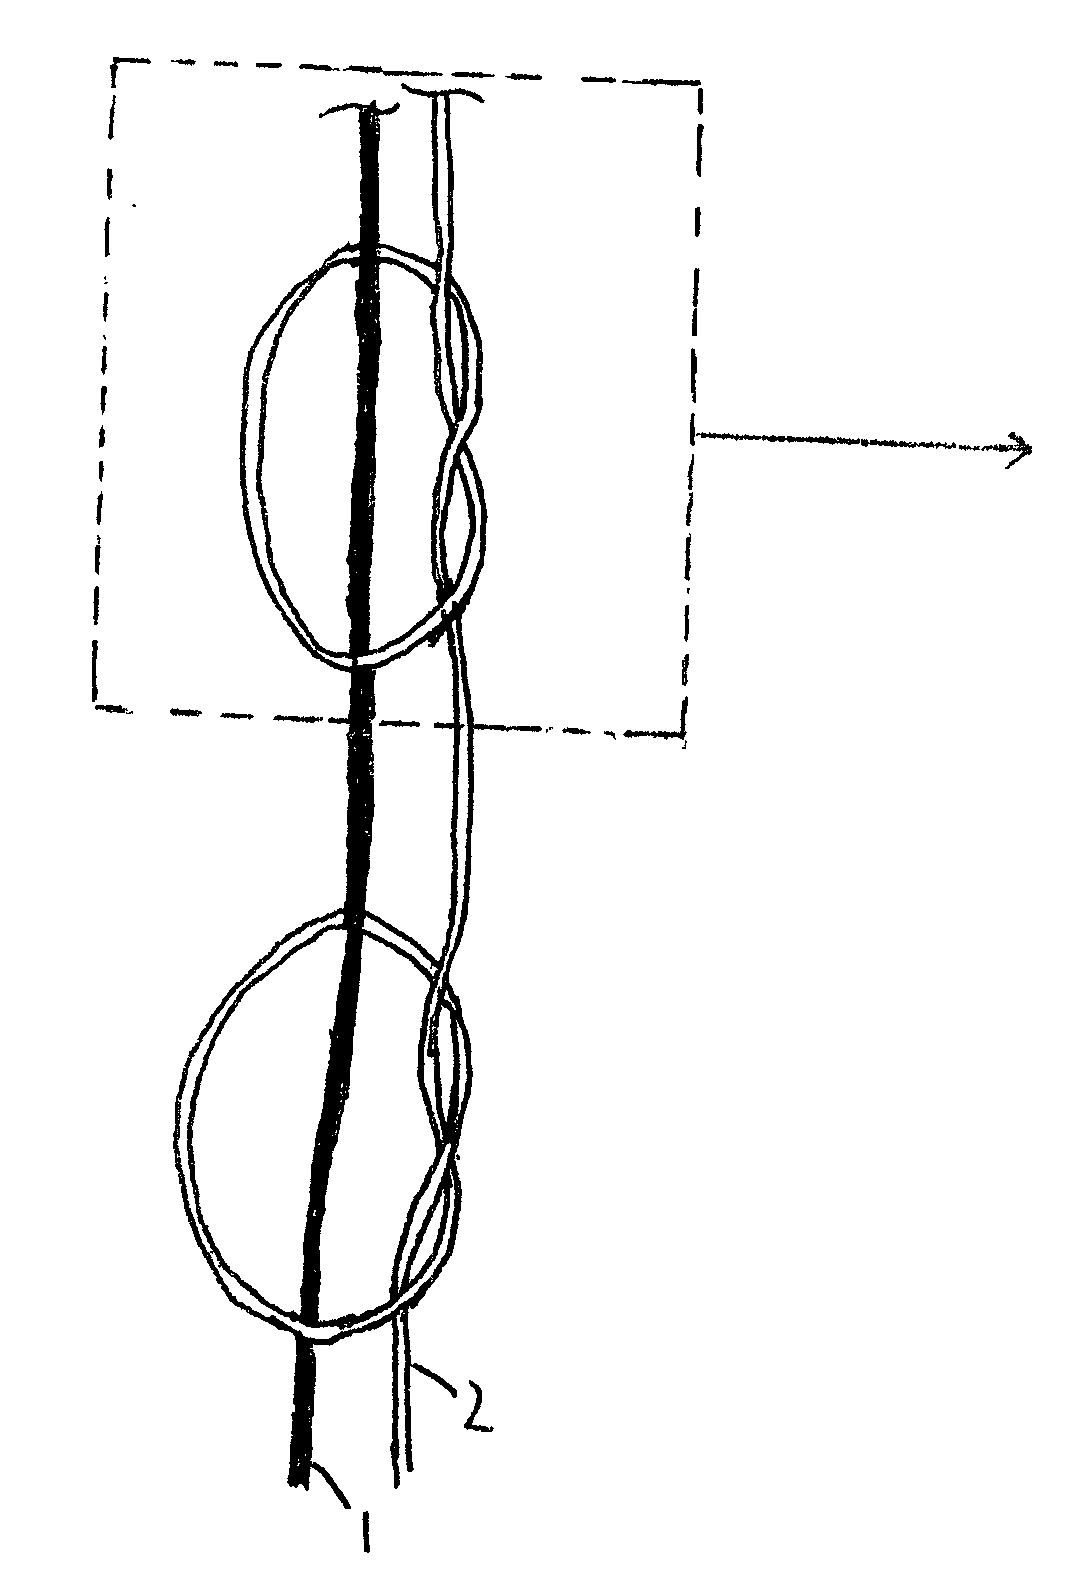 Knotting method for one group of surgical slidable knots